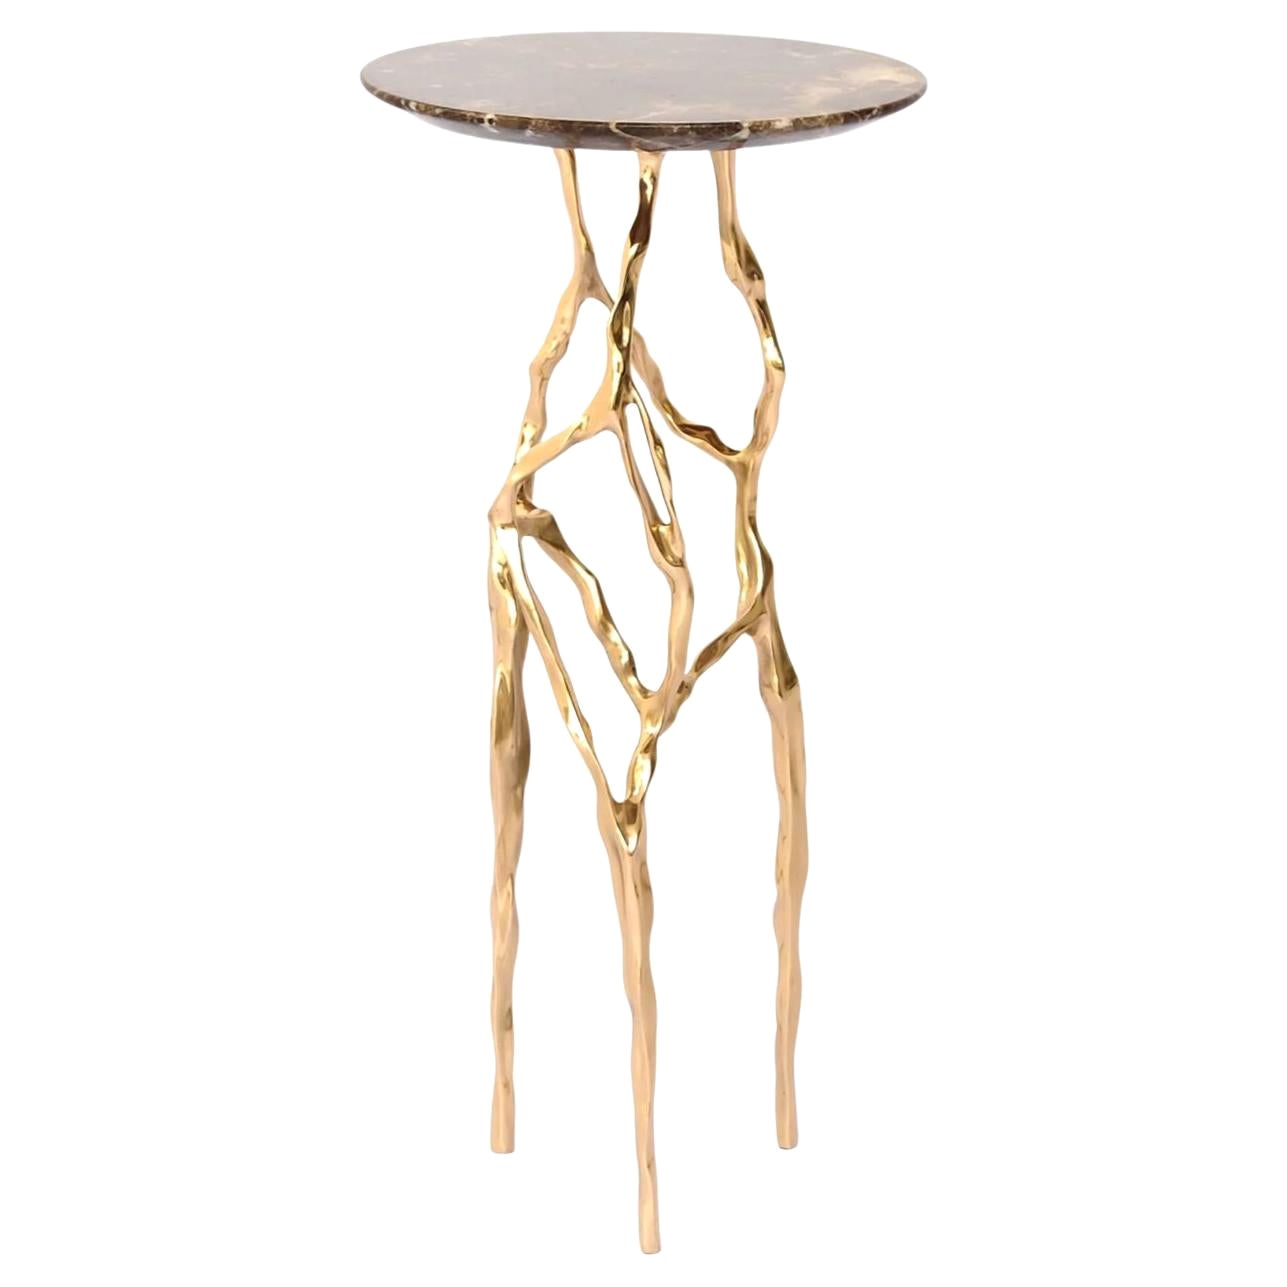 Sid Drink Table with Marrom Imperial Marble Top by Fakasaka Design For Sale